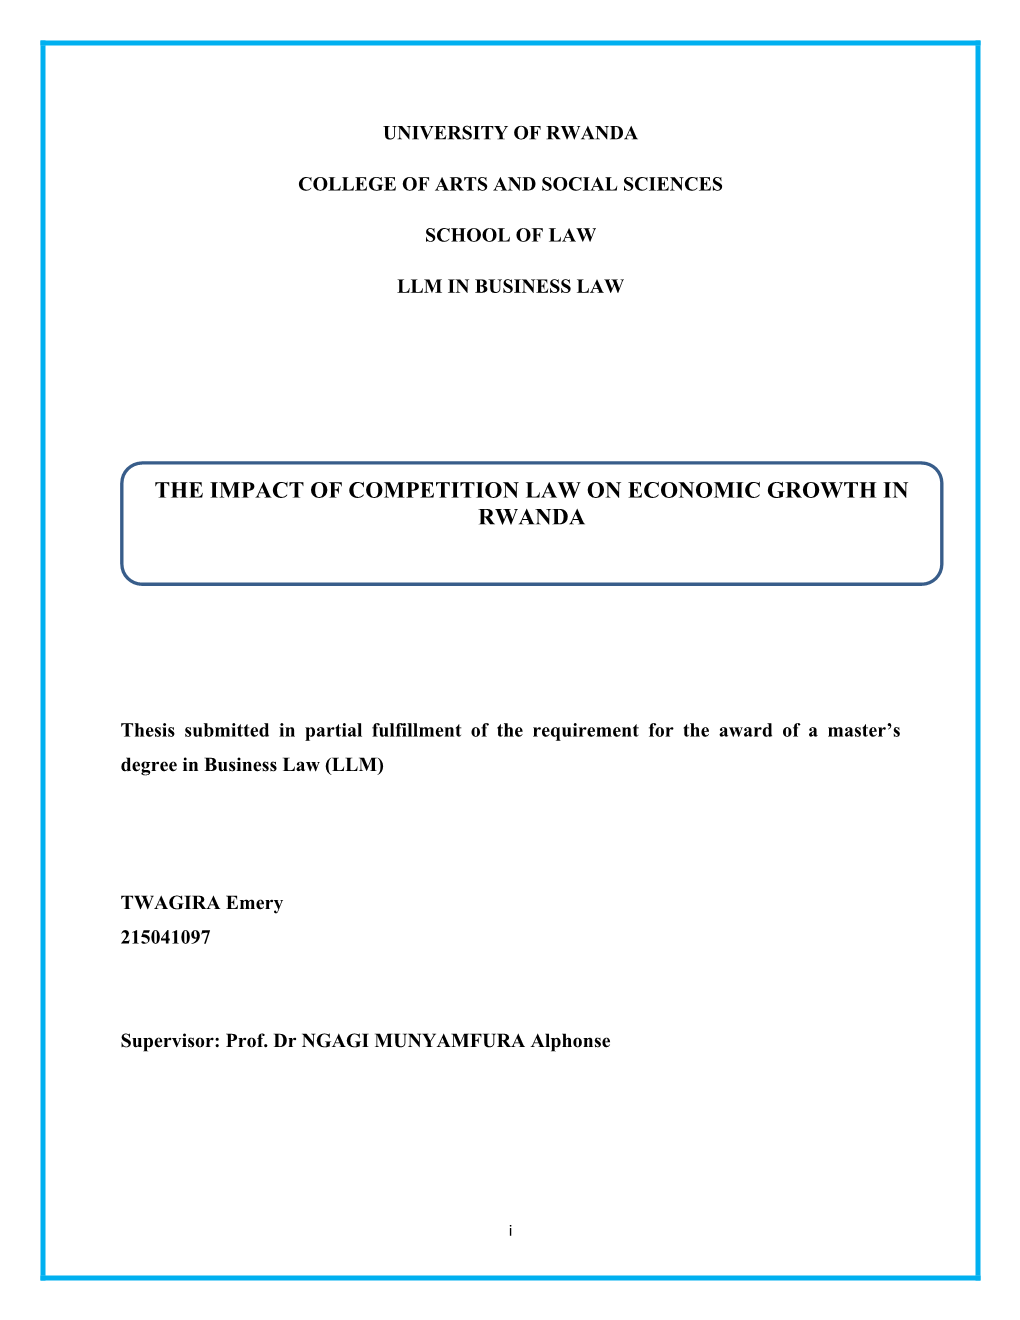 The Impact of Competition Law on Economic Growth in Rwanda